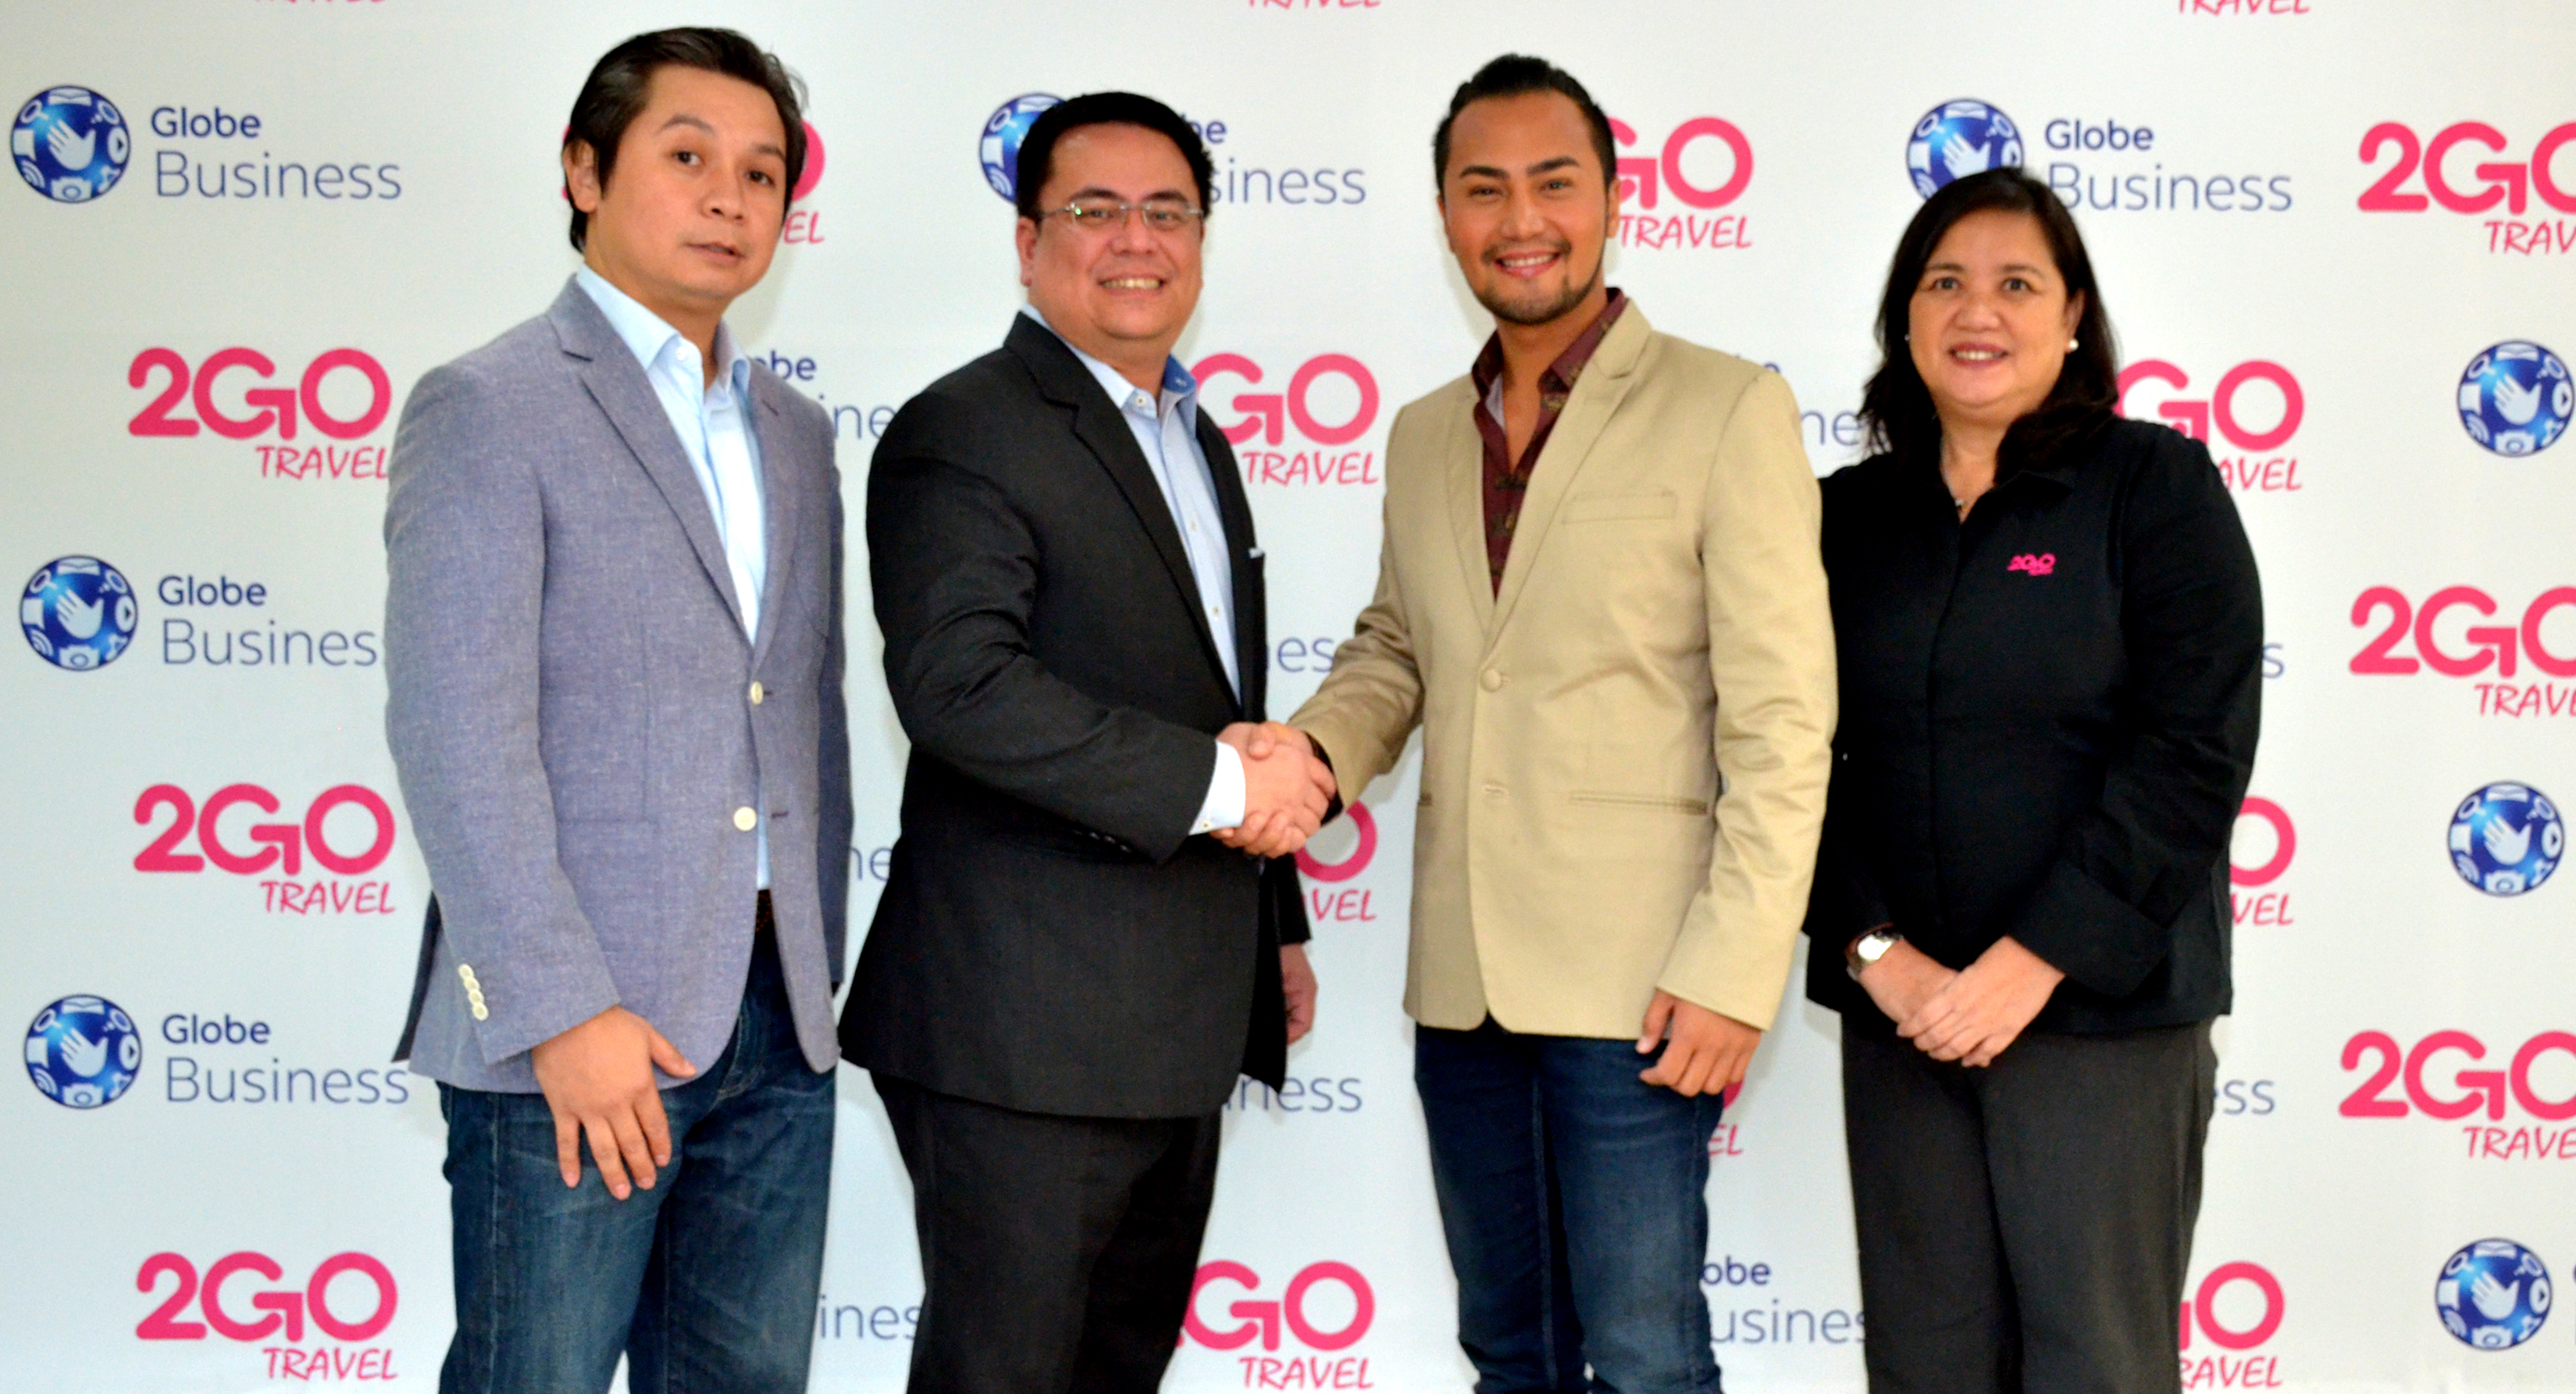 Sealing the partnership are 2Go Travel Senior Vice President Stephen Tagud (2nd from right) and With Globe Enterprise Sales Vice President Dion Asencio (2nd from left). With them are MYNT AVP for Business Development Jose Luigi Reyes (leftmost) and 2Go Travel VP for Retail Sales Grace Golez (rightmost).